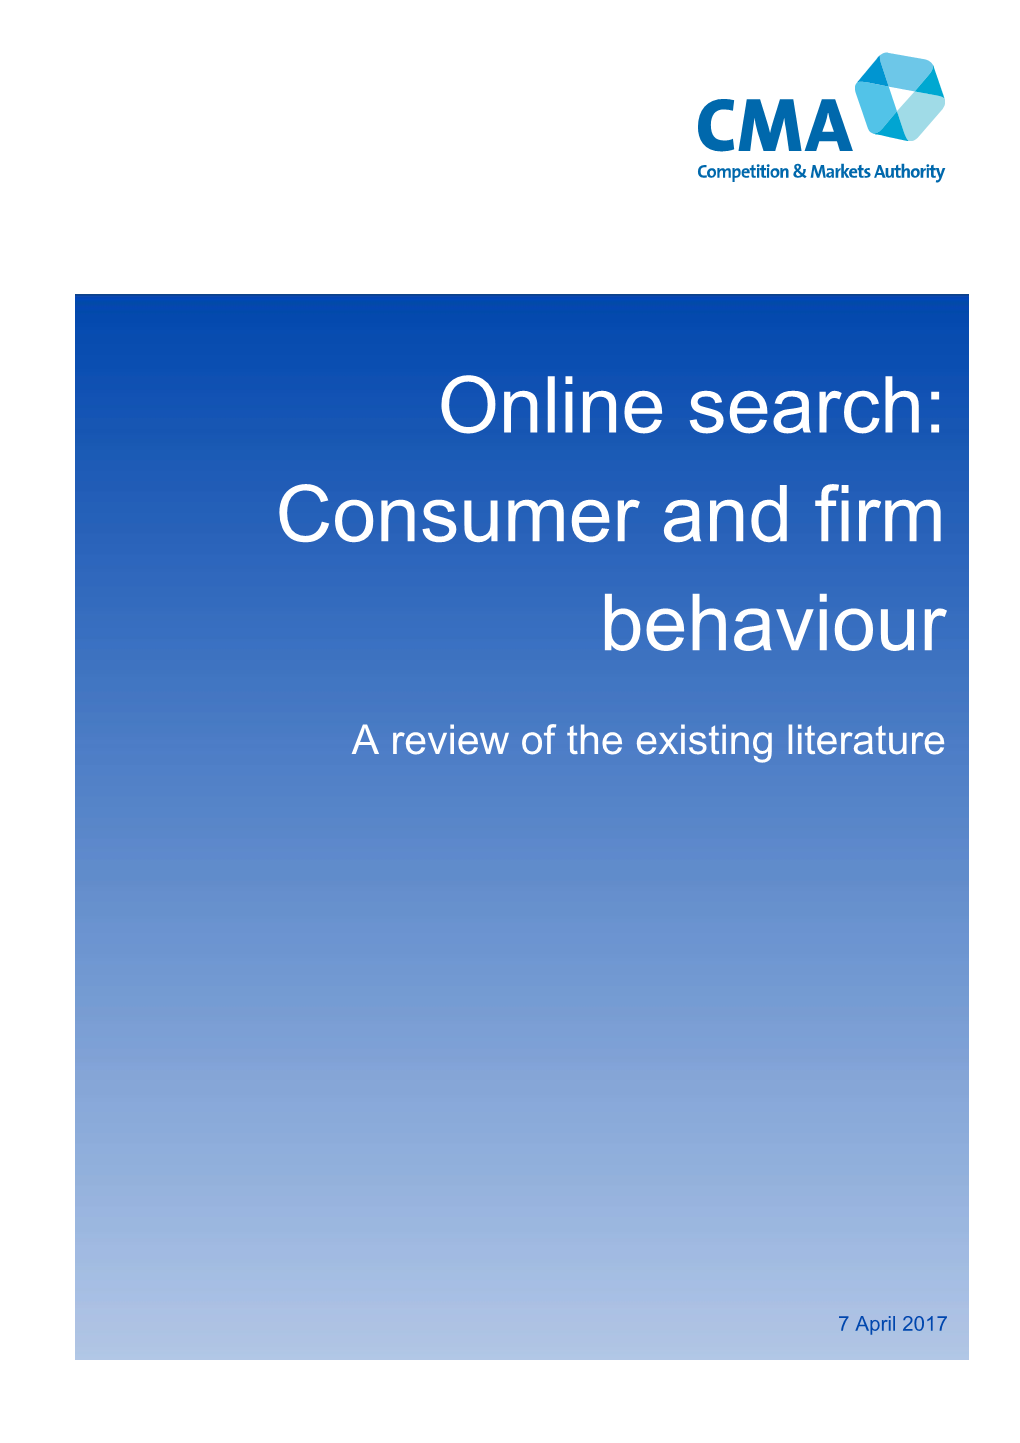 Online Search: Consumer and Firm Behaviour